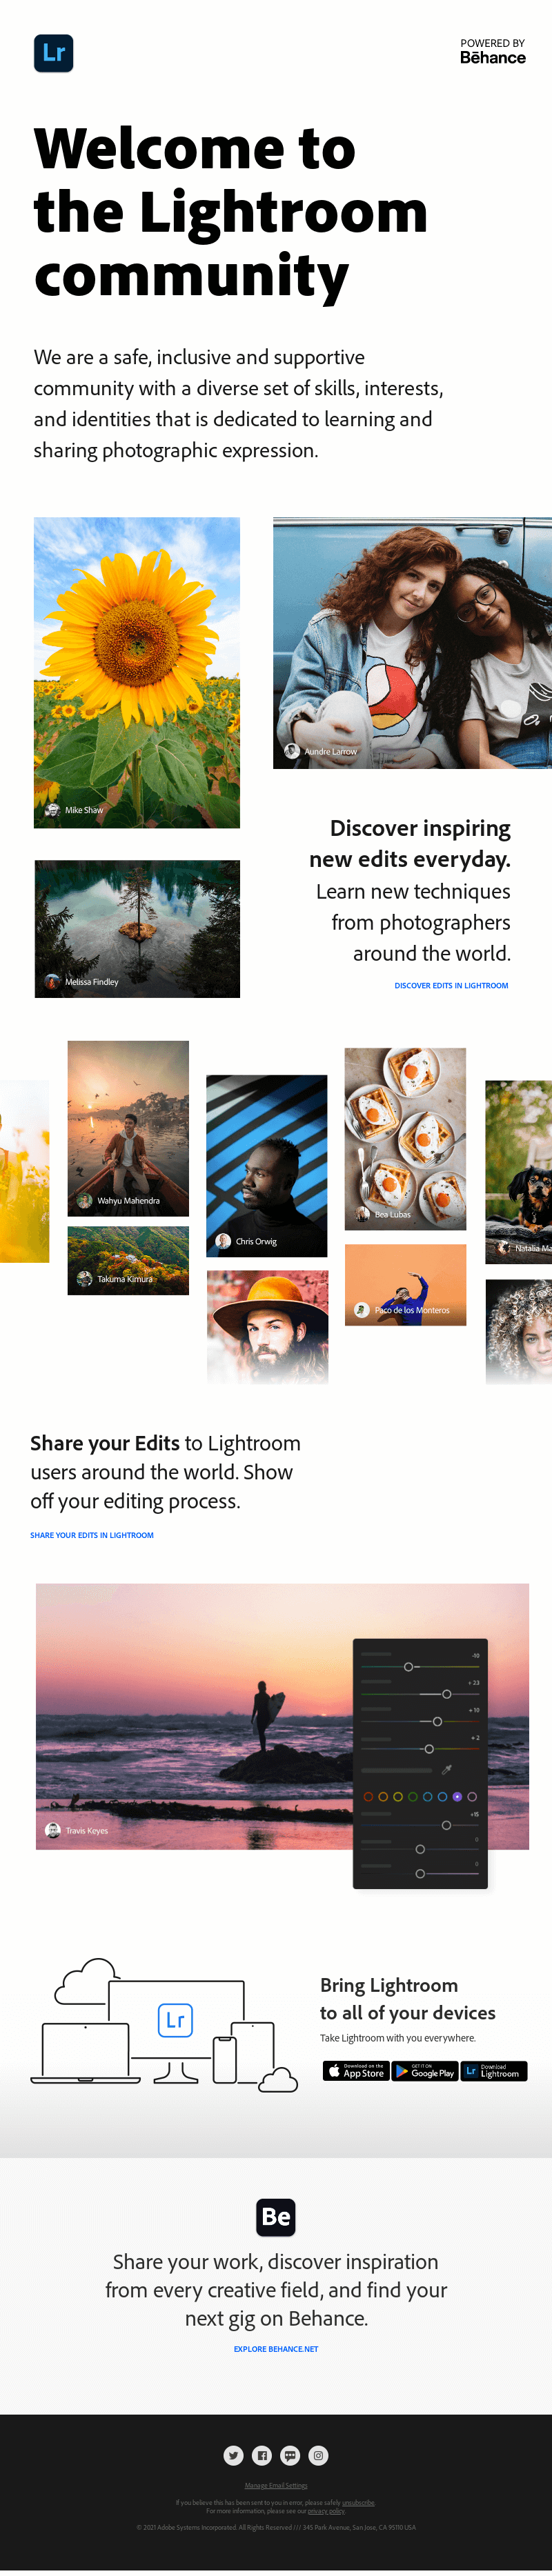 Welcome to the Lightroom community - Adobe Email Newsletter